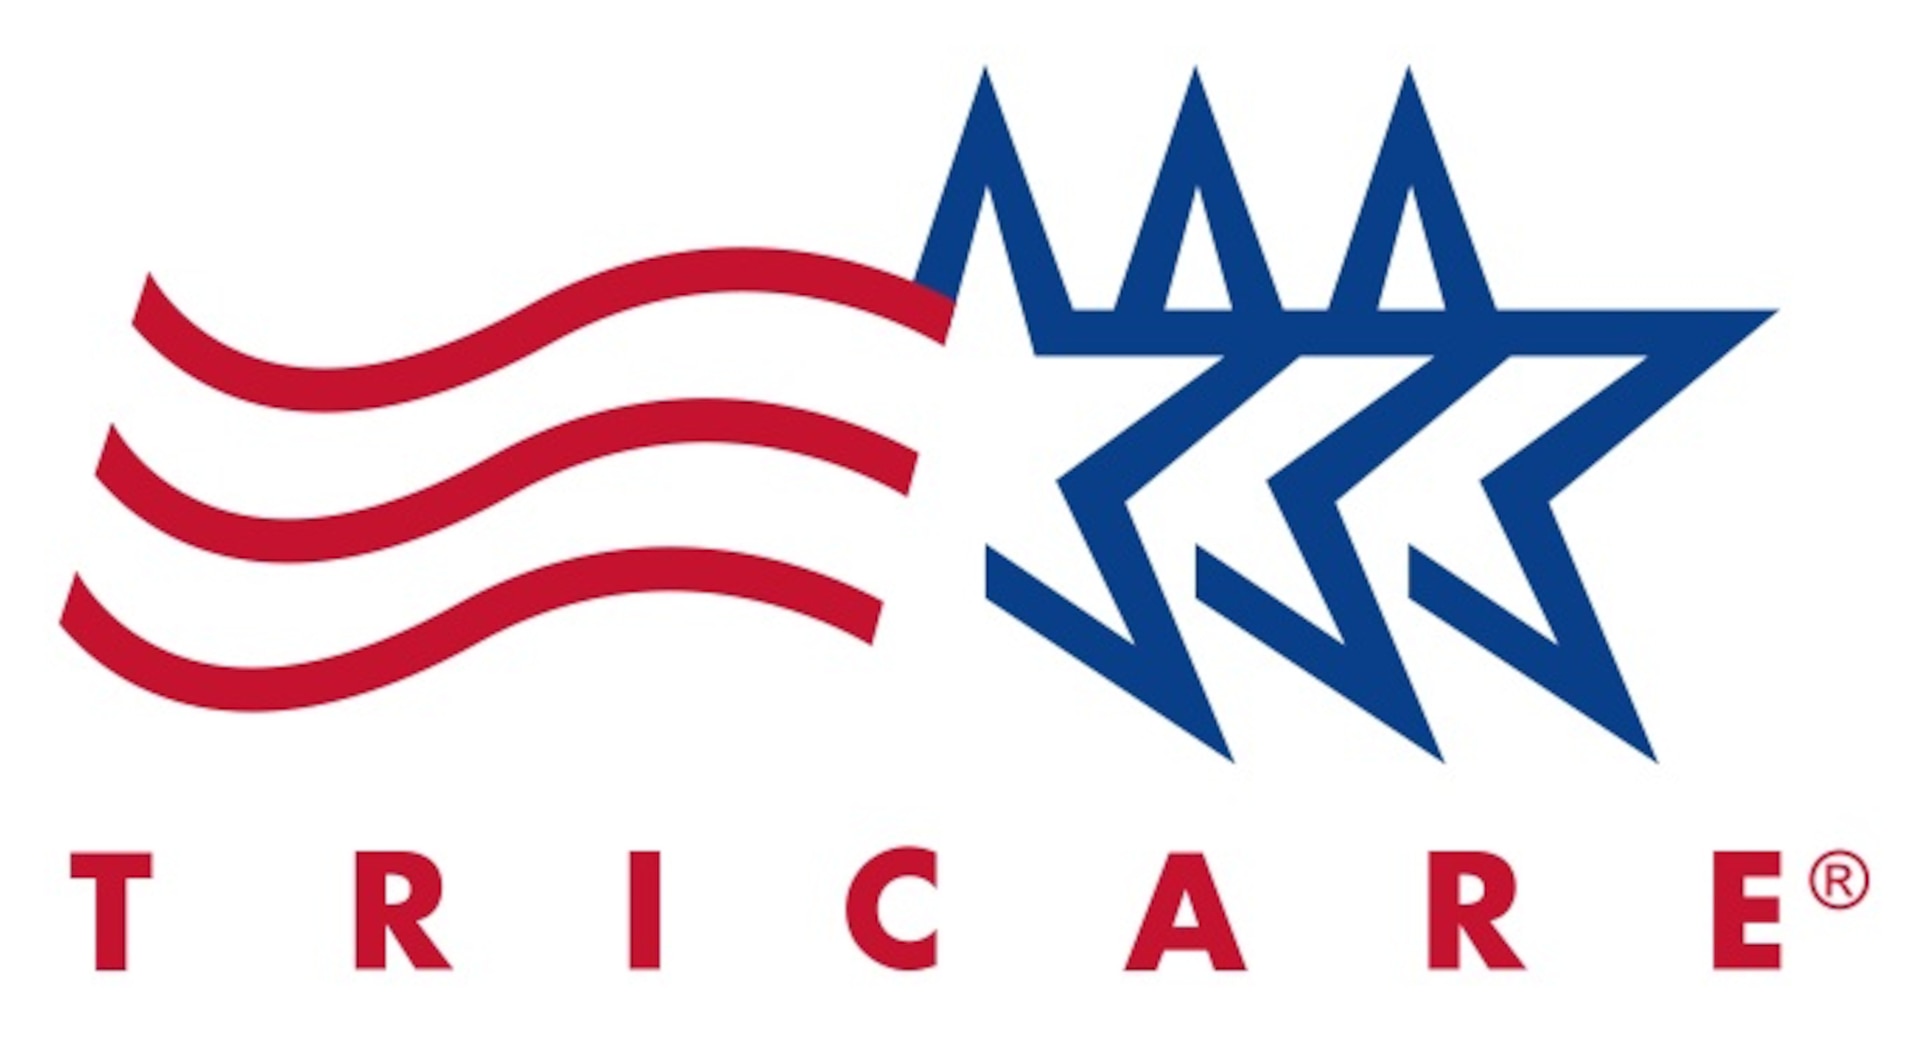 When you retire from active duty or turn age 60 as a retired reserve member, your TRICARE coverage changes.